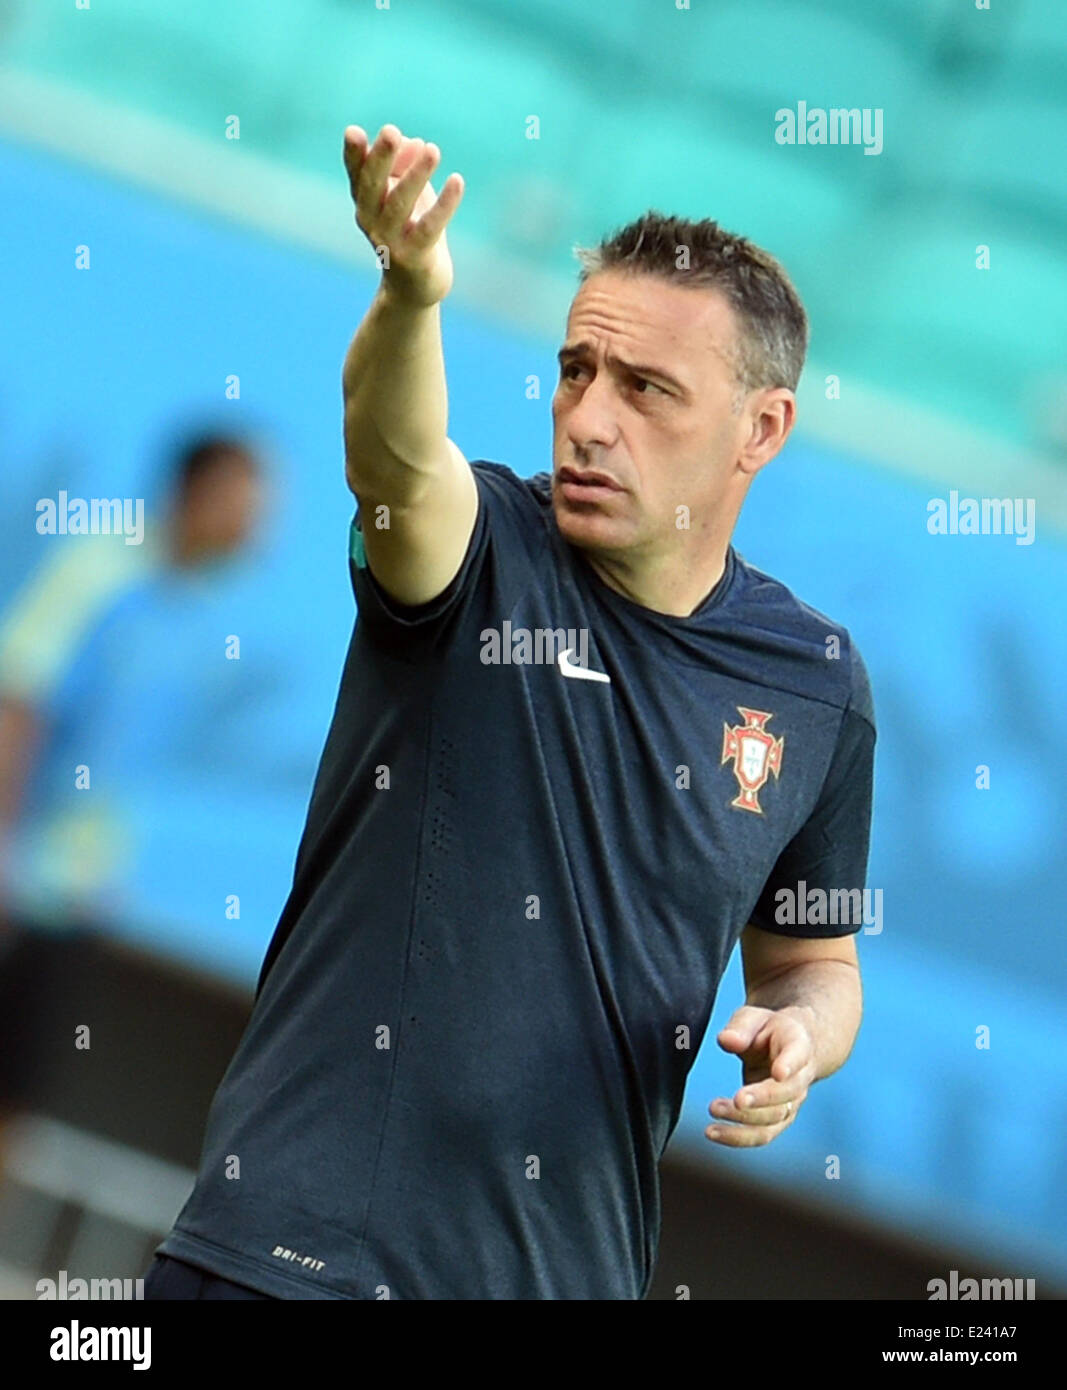 Salvador da Bahia, Brazil. 15th June, 2014. Head coach Paulo Bento gestures during a training session of the Portugal's national soccer team at the Arena Fonte Nova Stadium in Salvador da Bahia, Brazil, 15 June 2014. Germany will face Portugal in their group G preliminary round match at the FIFA World Cup 2014 on 16 June 2014 in Salvador da Bahia. Photo: Andreas Gebertt/dpaile alert services, downloads t/Alamy Live News Stock Photo